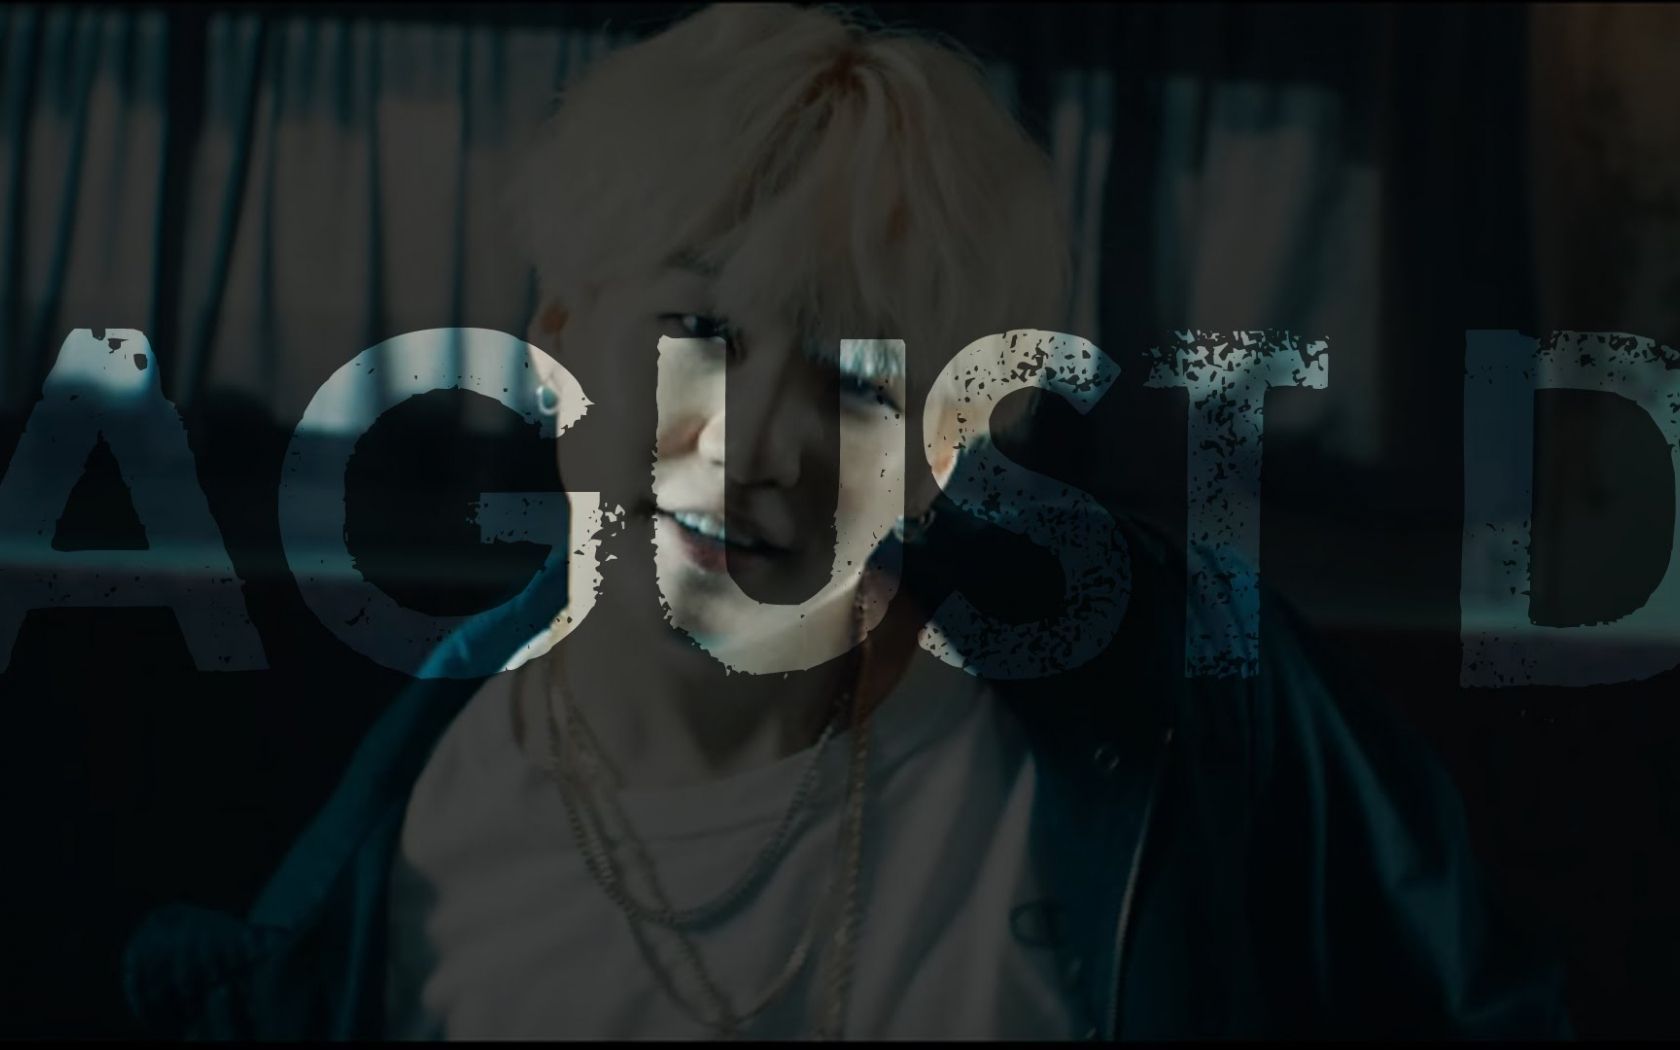 Agust D Wallpapers